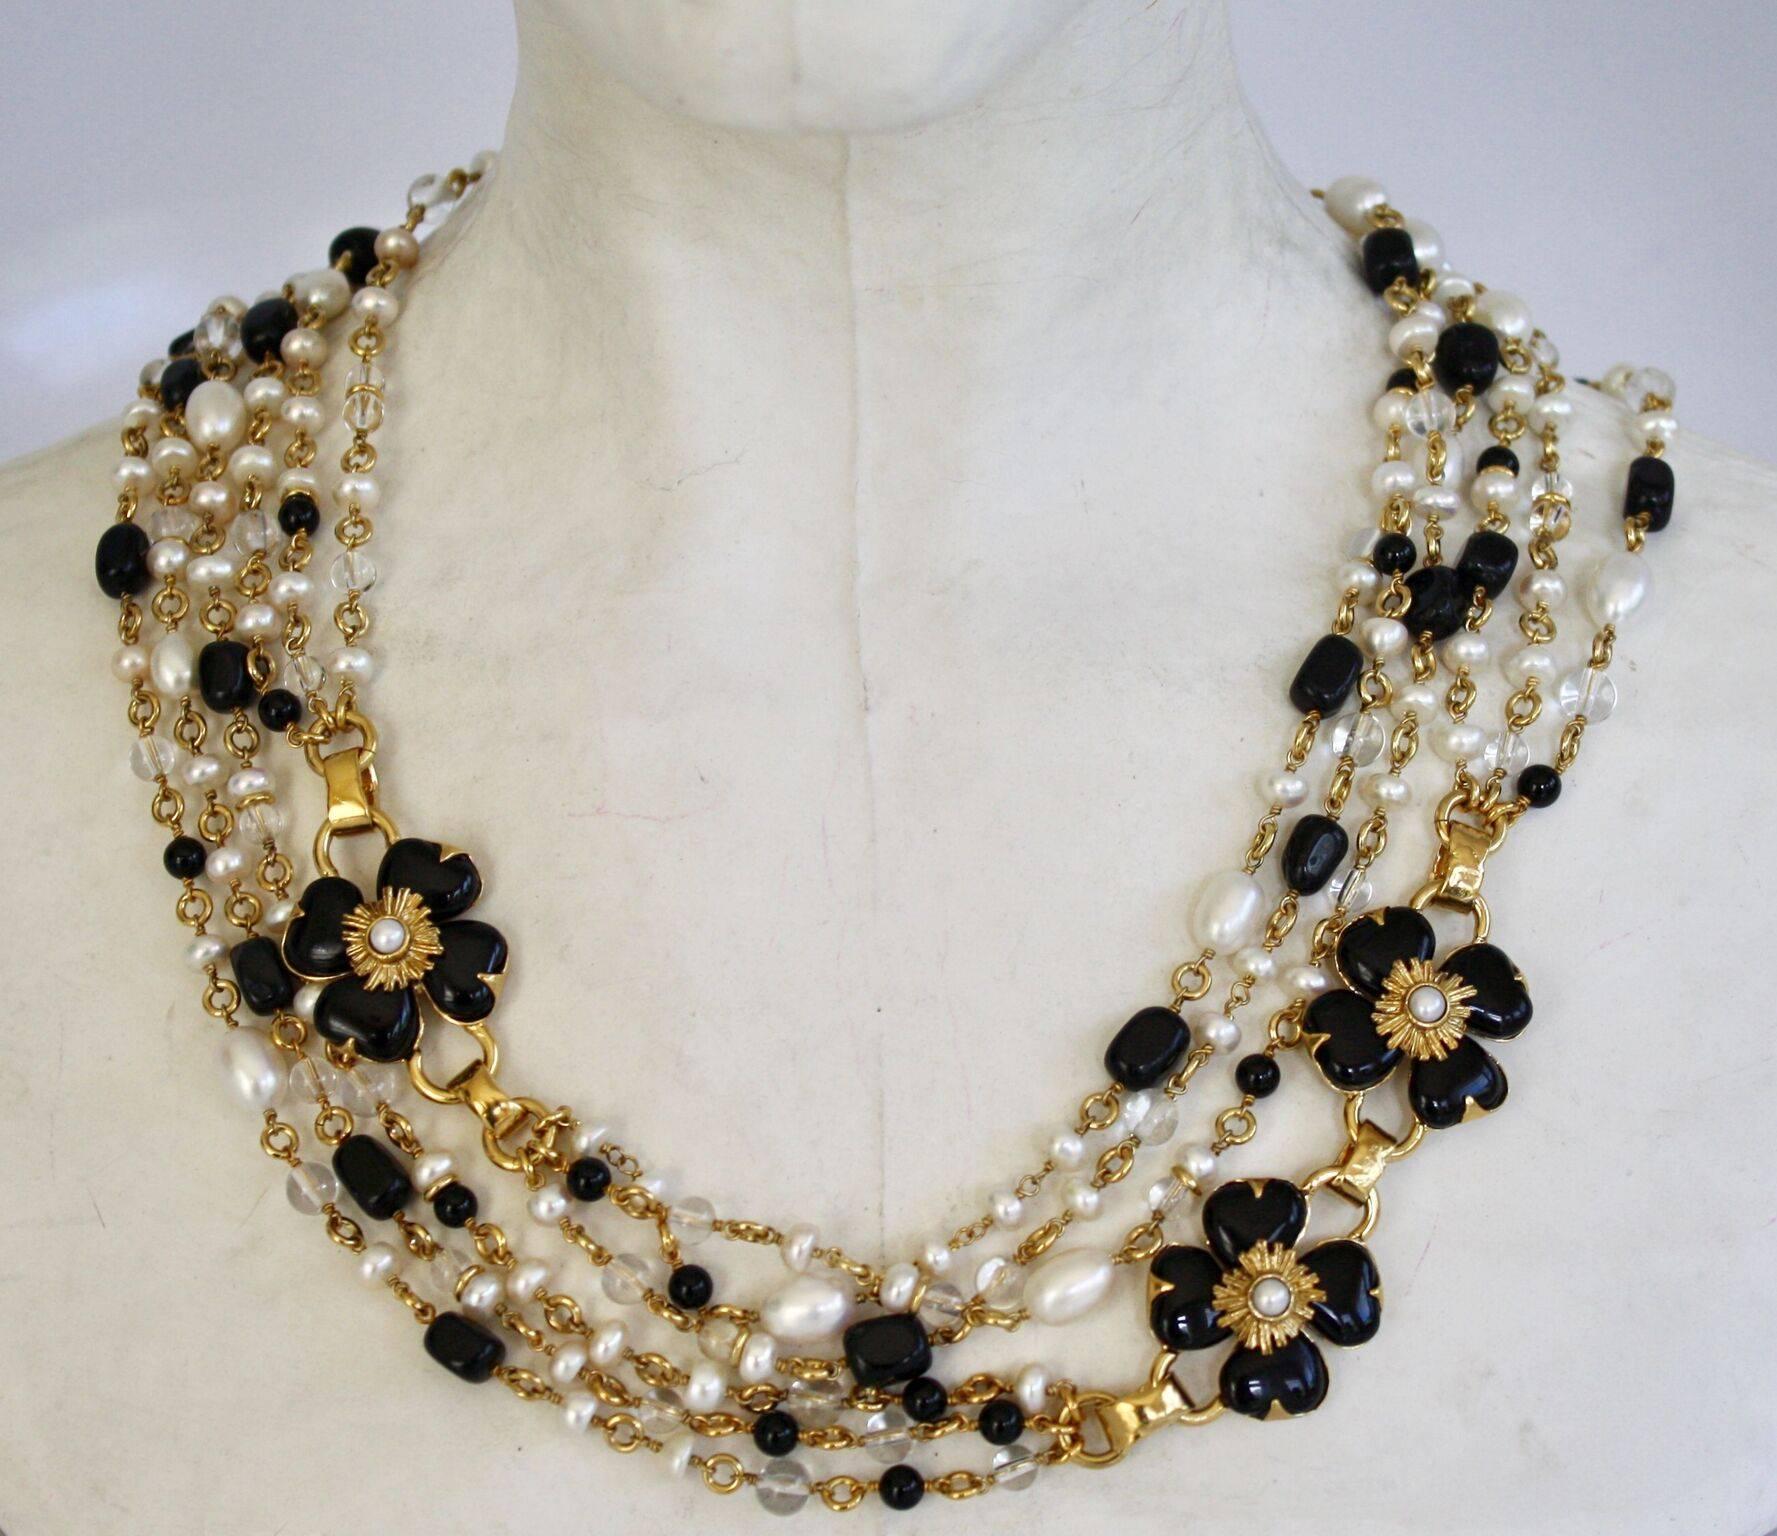 Goossens Paris multi strand necklace of black onyx beads, clear rock crystals, and natural pearls with black onyx clover features. This long necklace can also be doubled or tripled and worn short as a choker. 
